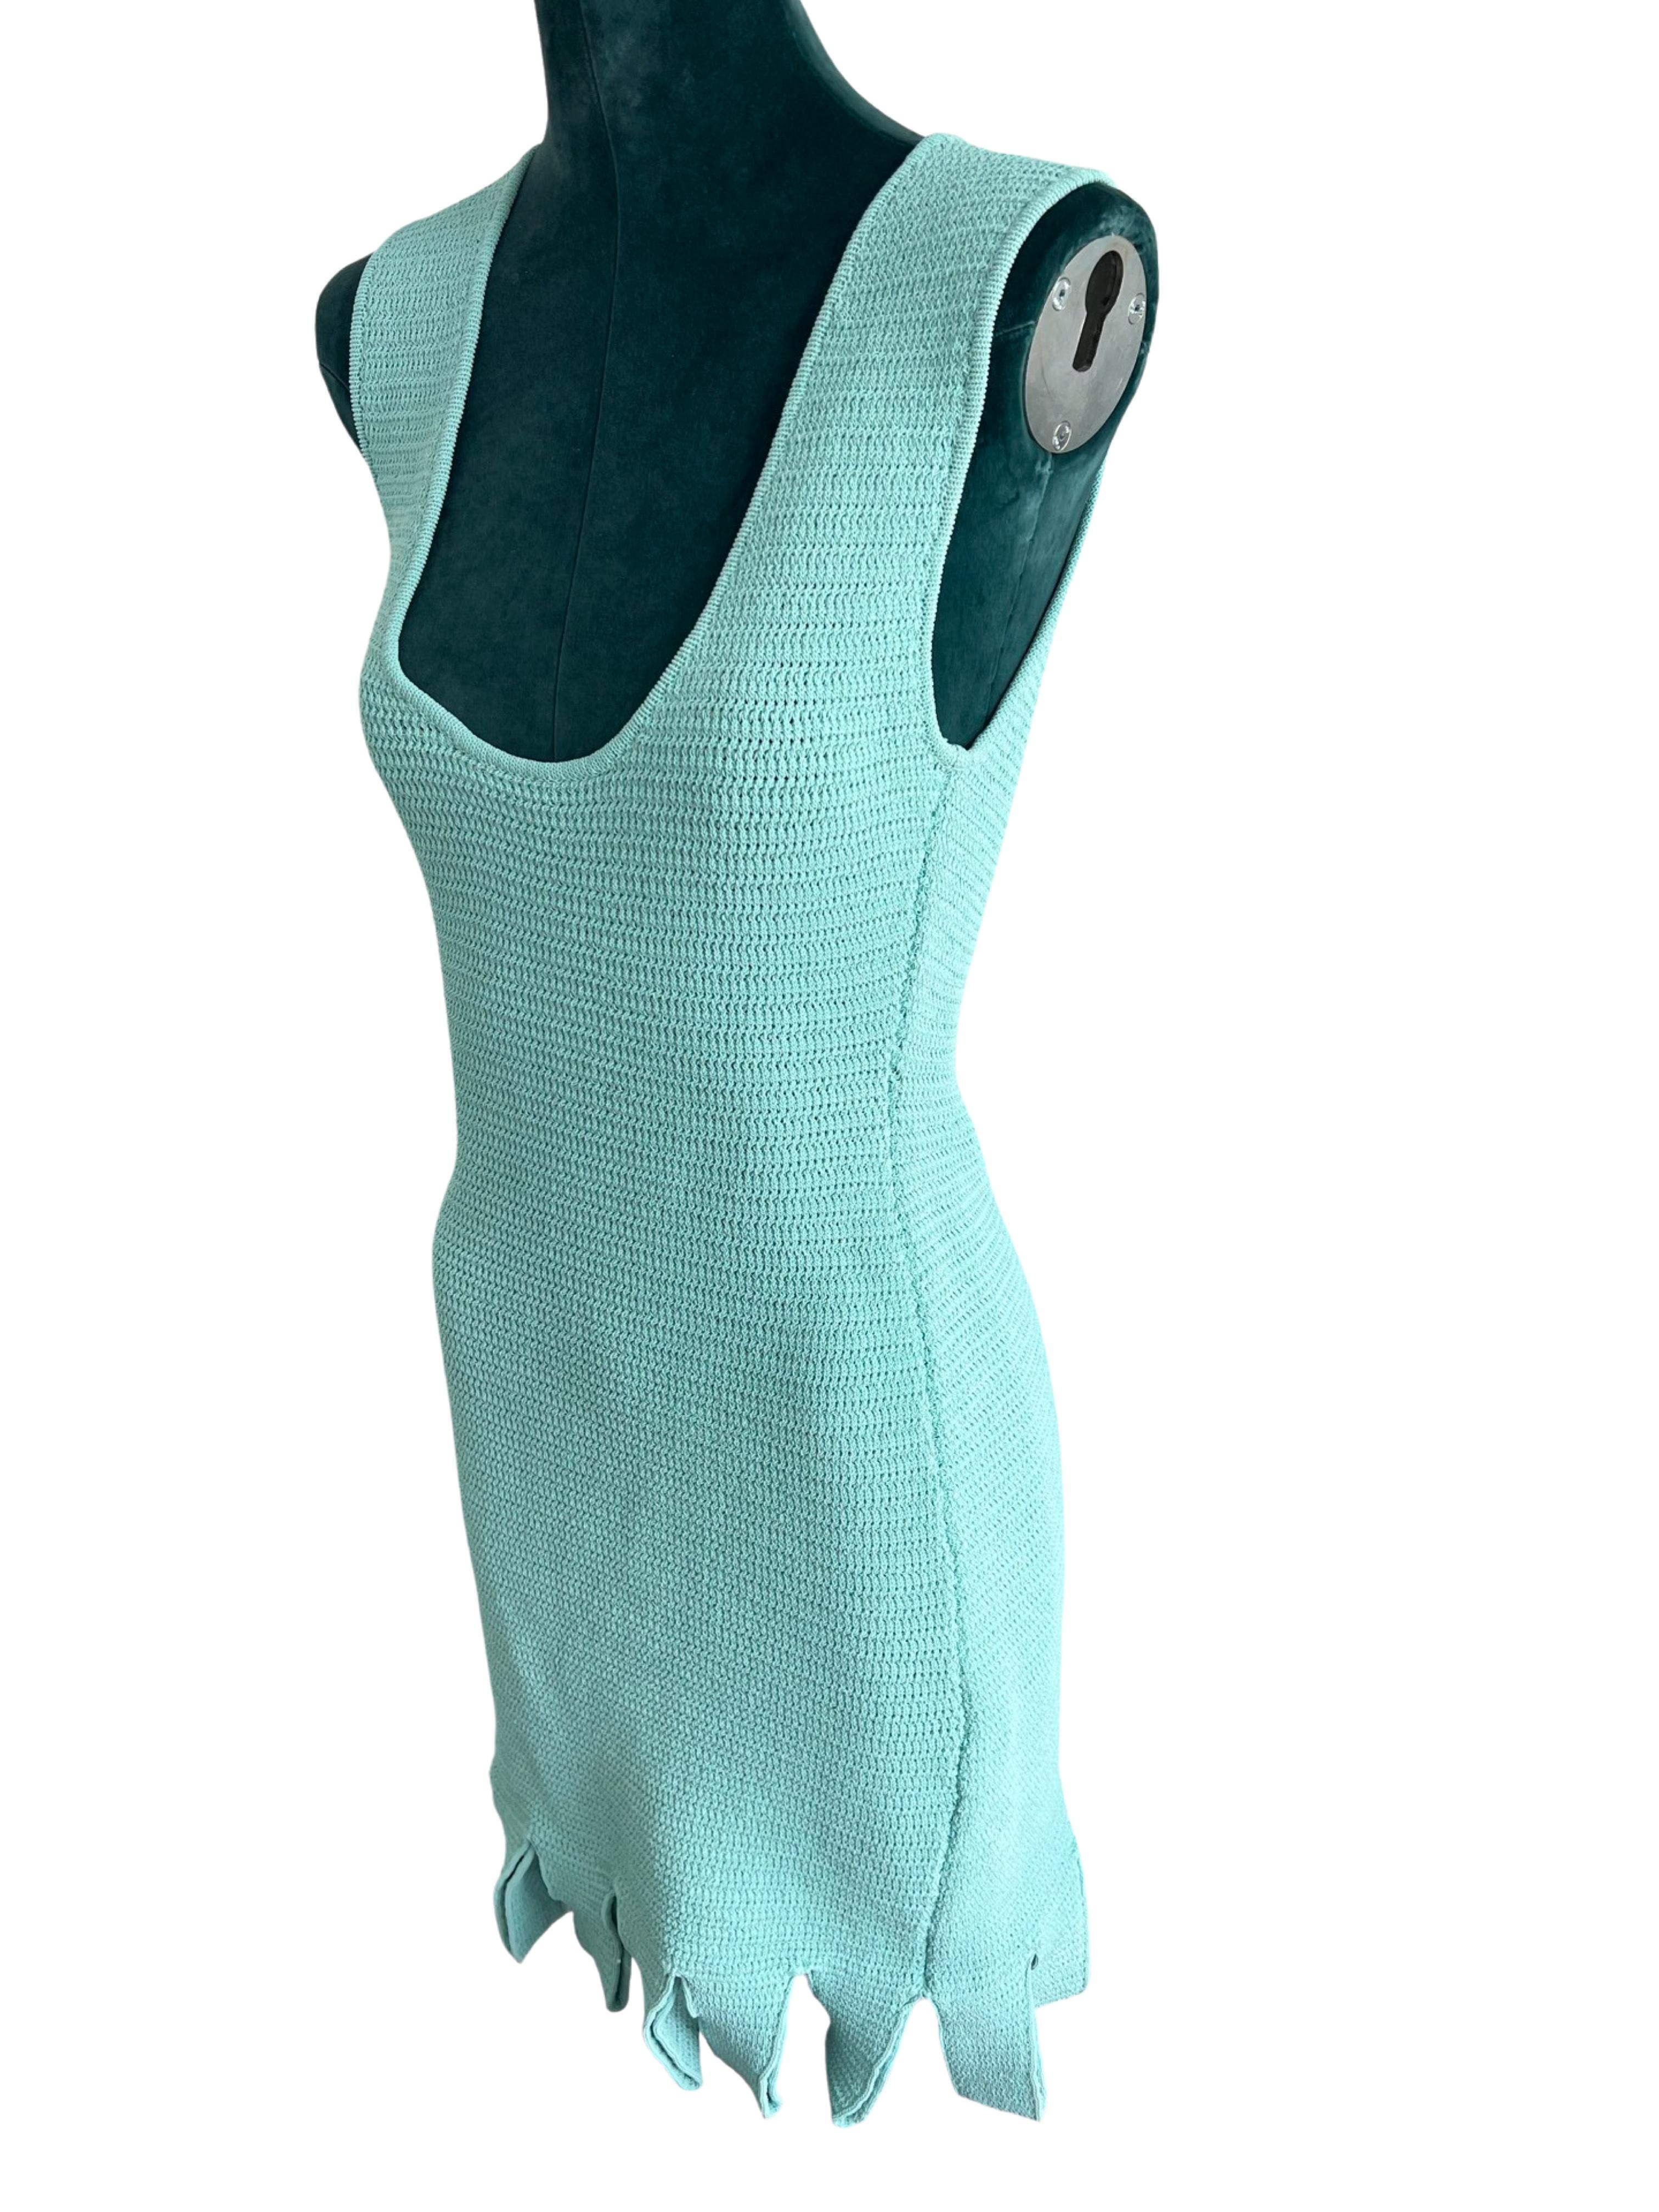 Bottega Veneta Turquoise  Racked Rib Knit Dress and Jacket size S  In Excellent Condition For Sale In Toronto, CA